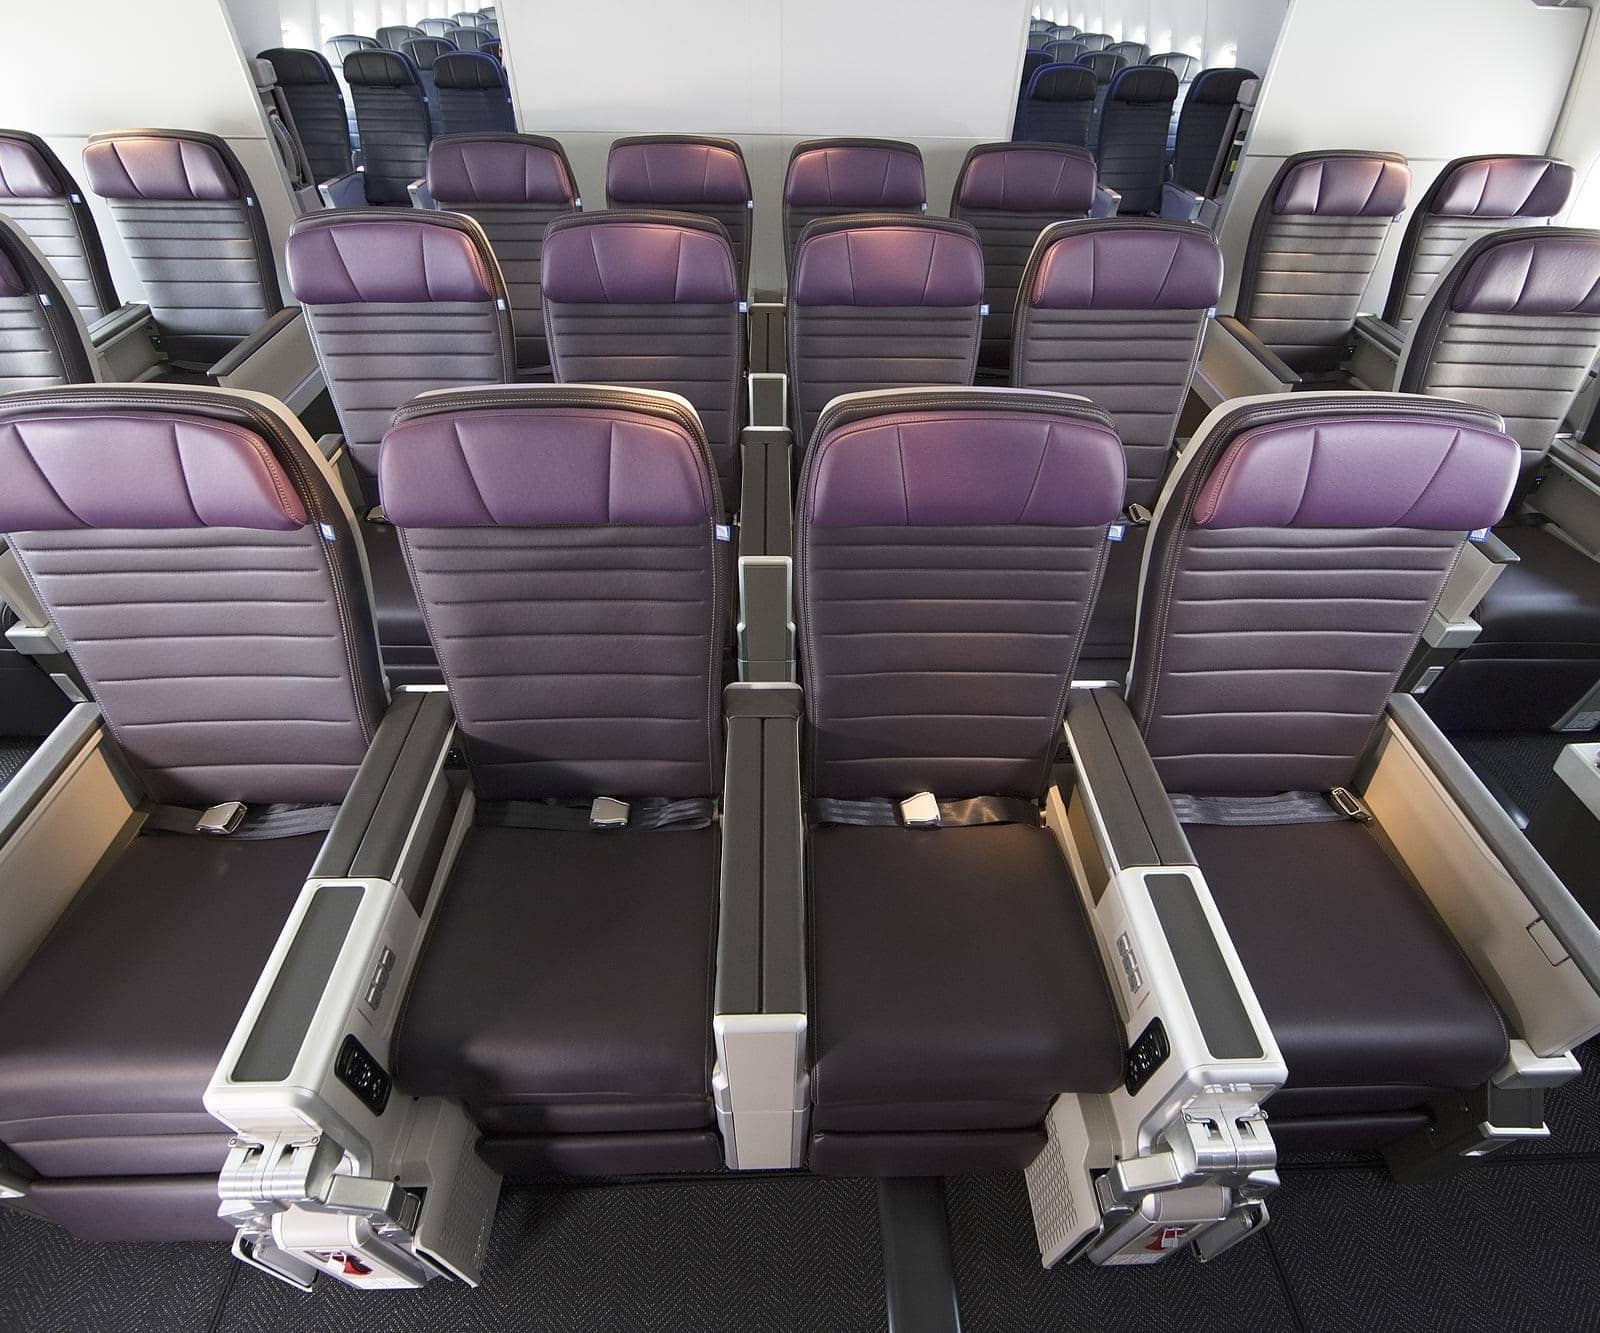 Is The New United Premium Economy Seat Worth The Cost Valuepenguin,How To Paint Bedroom Walls White